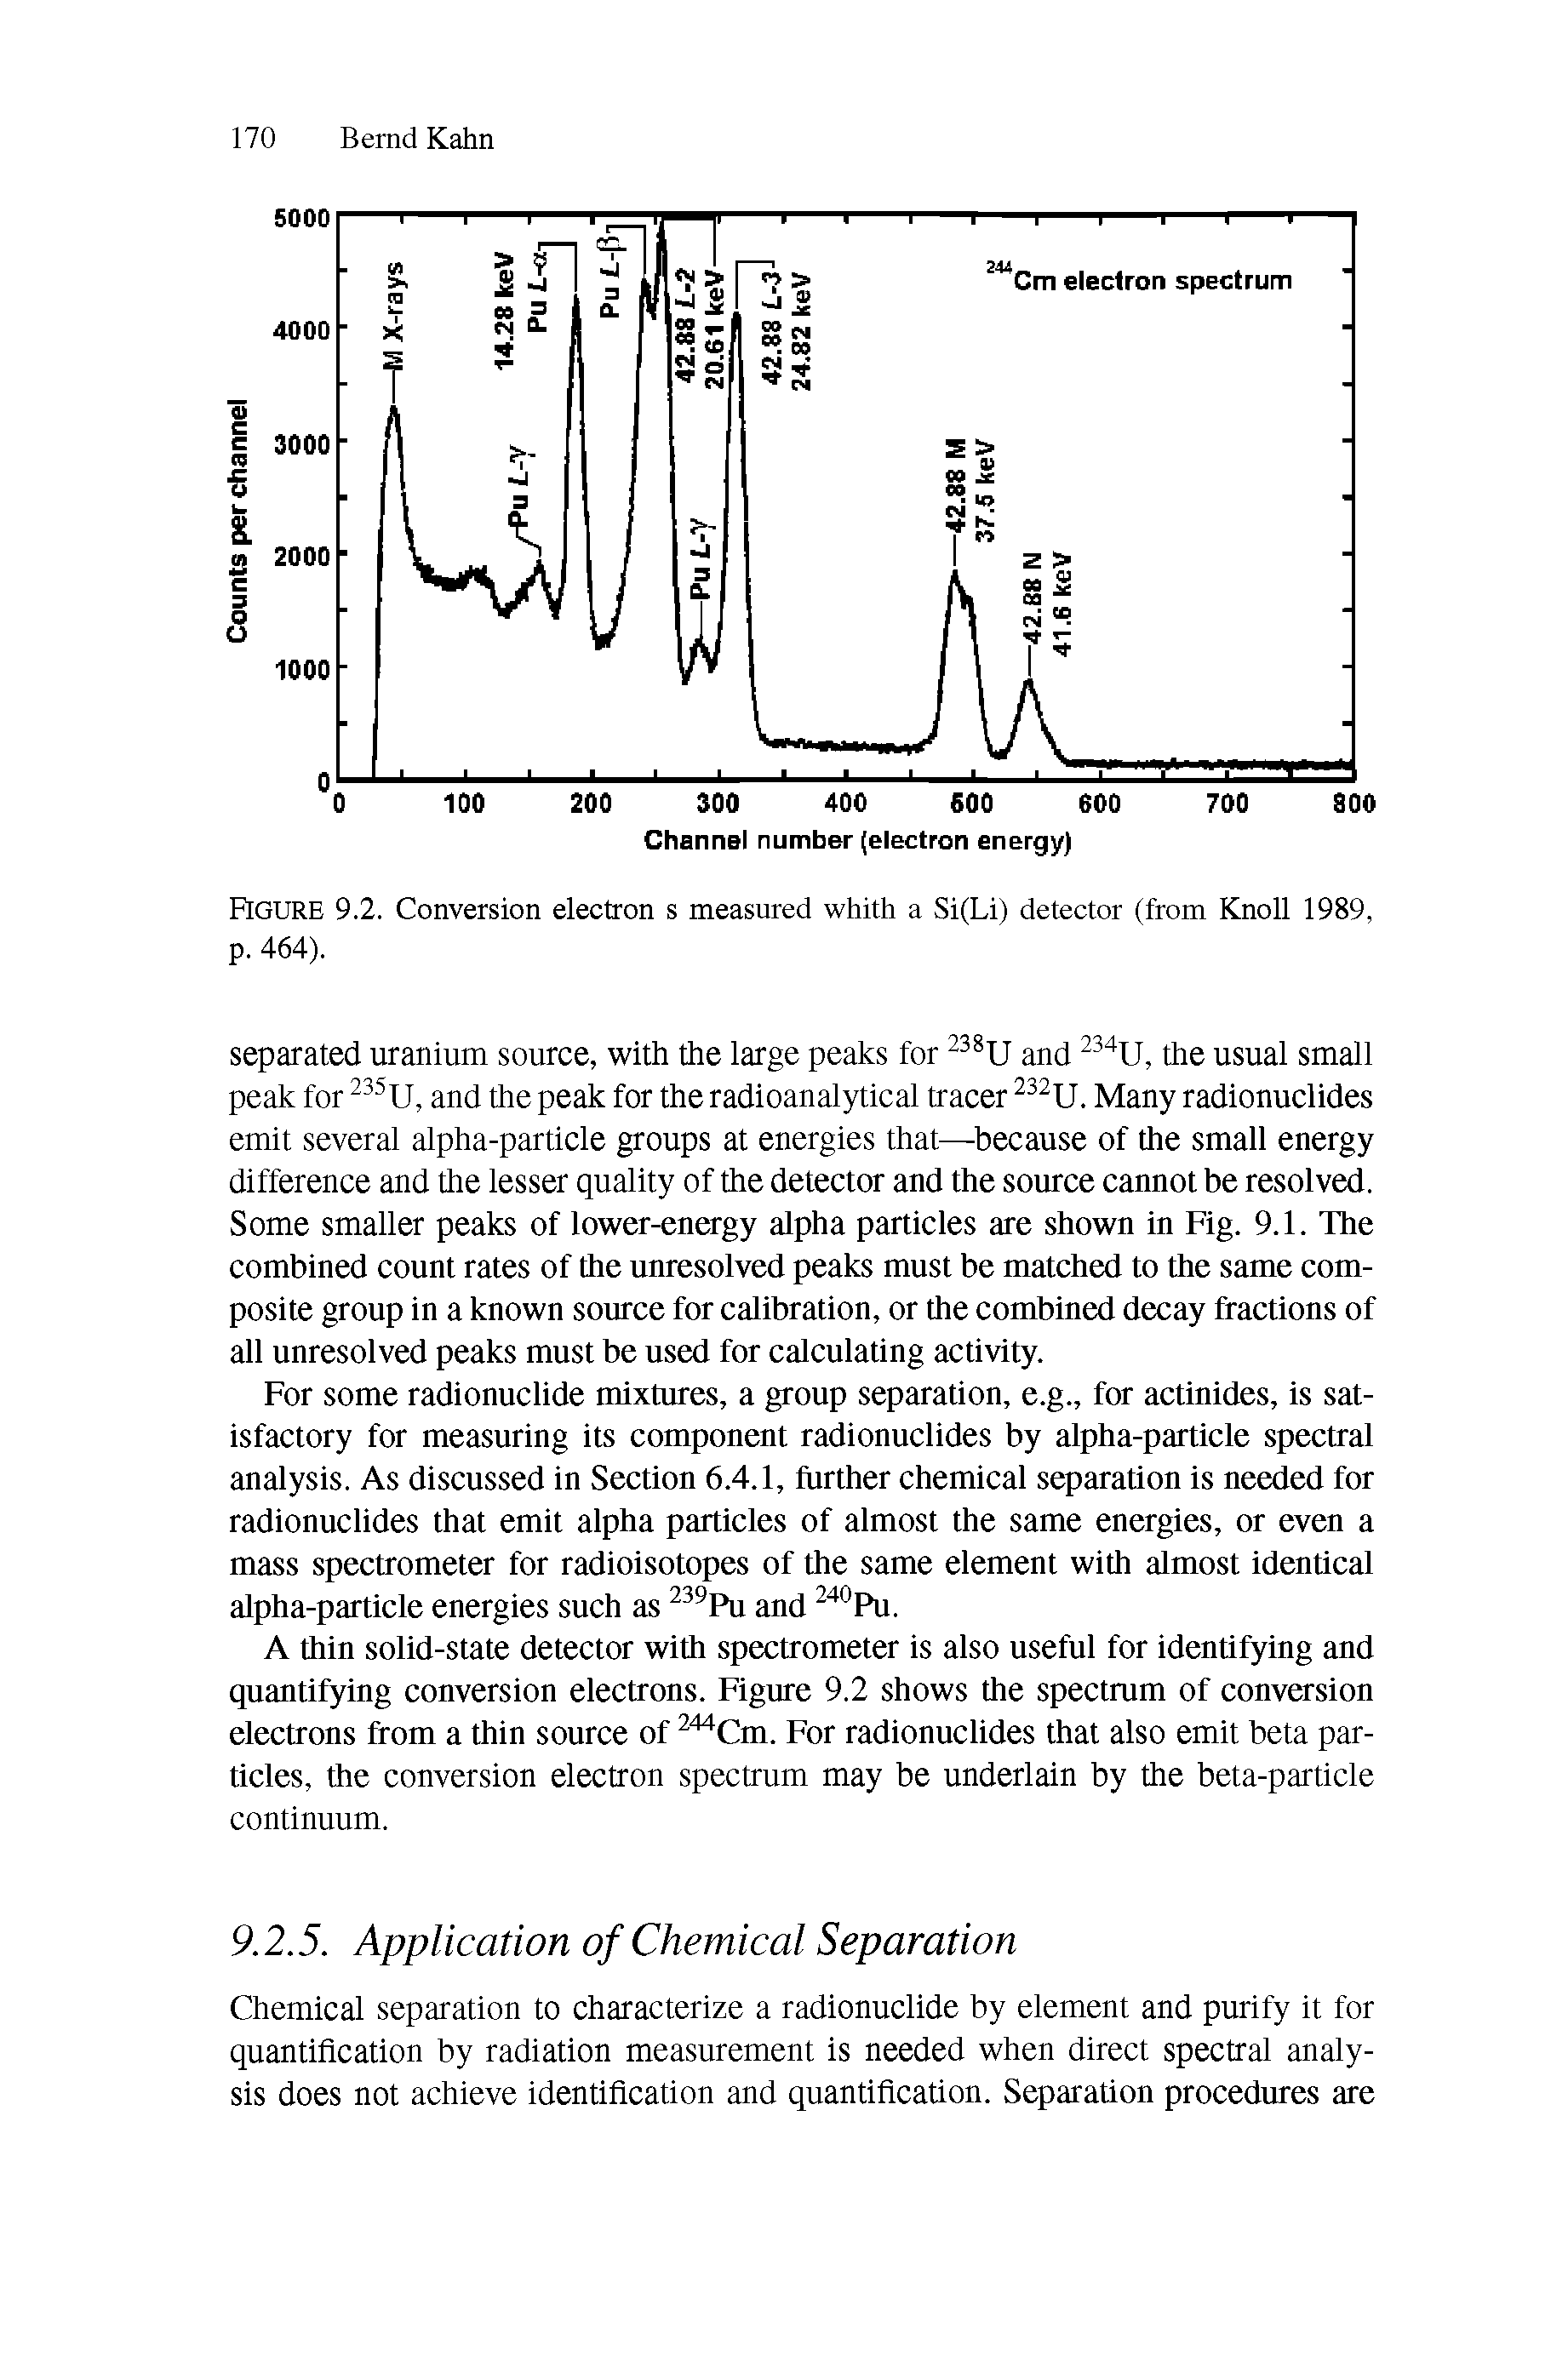 Figure 9.2. Conversion electron s measured whith a Si(Li) detector (from Knoll 1989, p. 464).